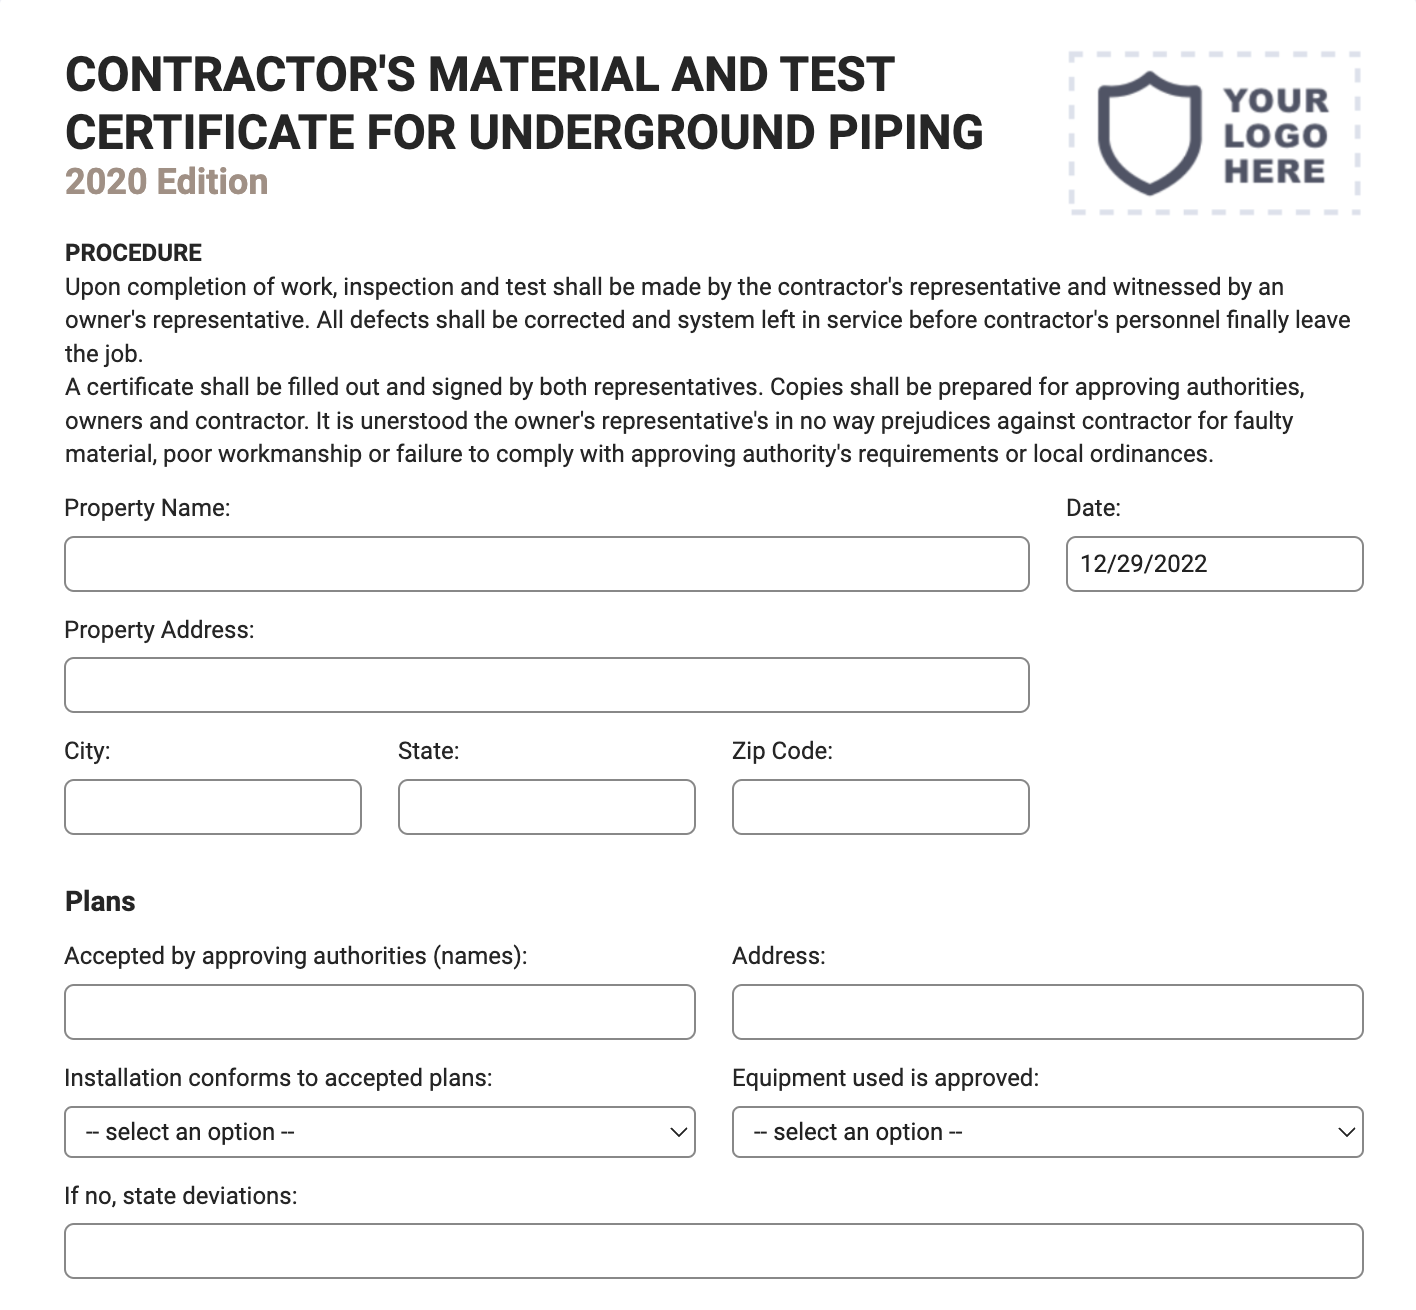 contractor’s material and test certificate for underground piping form